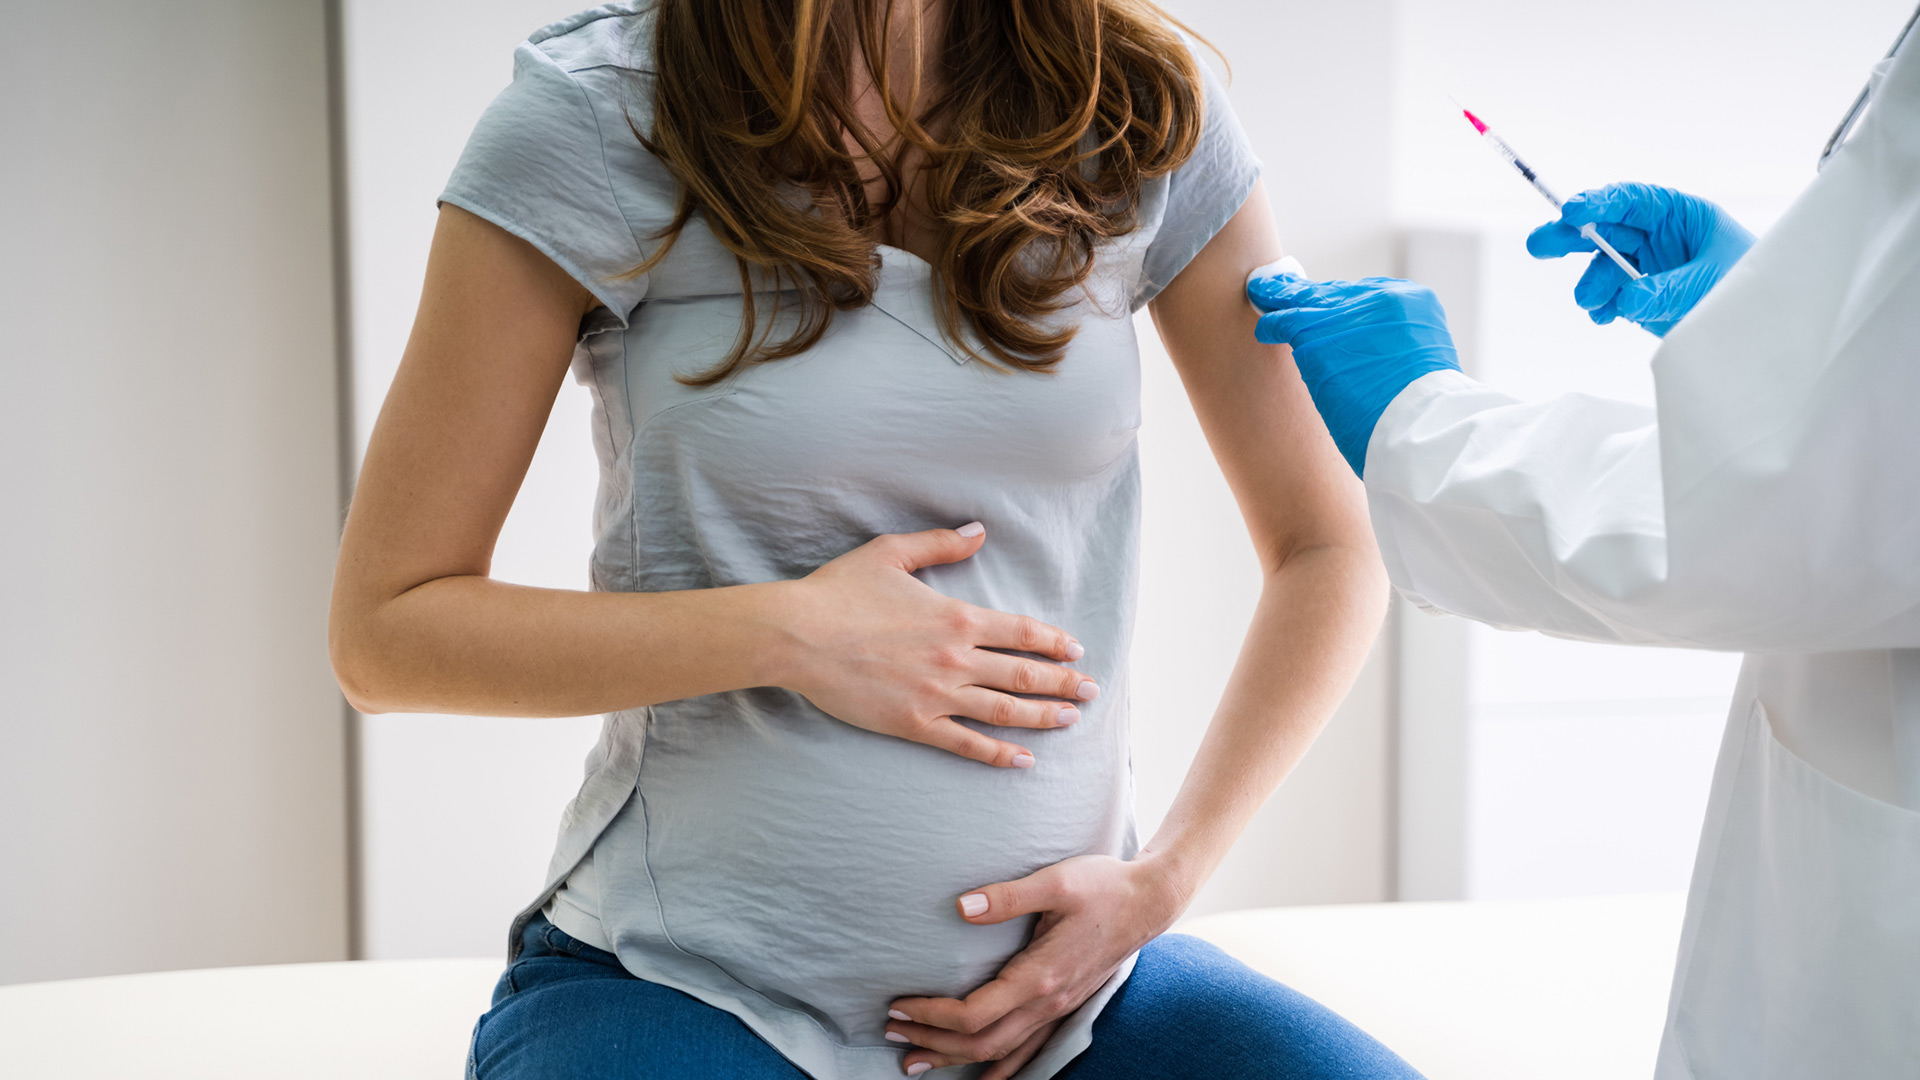 Do you have questions about the COVID-19 vaccine and pregnancy? Atrium Health experts share helpful information surrounding this important topic, along with promising data showing that vaccines are safe for moms-to-be.